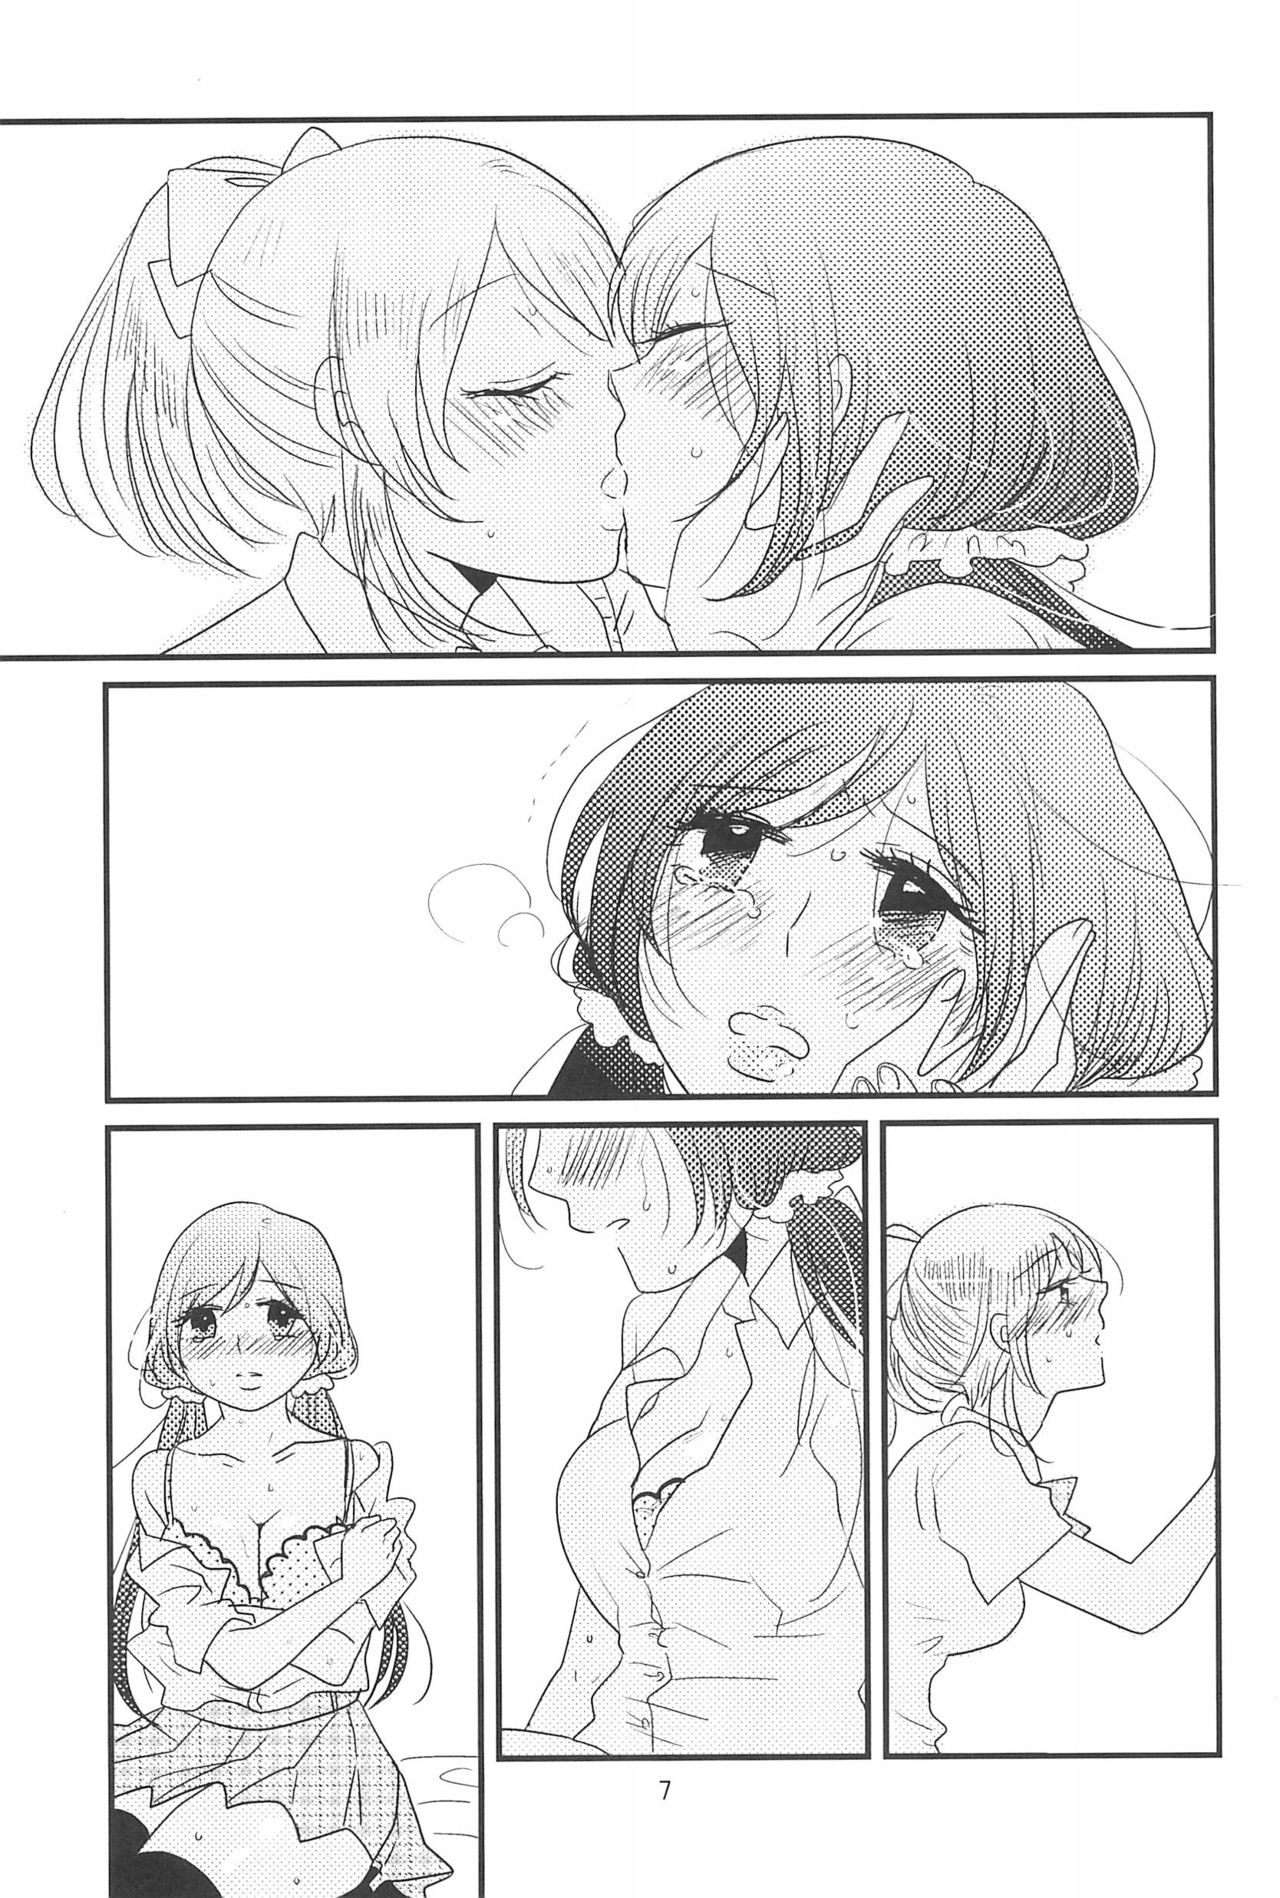 (C90) [BK*N2 (Mikawa Miso)] HAPPY GO LUCKY DAYS (Love Live!) page 11 full